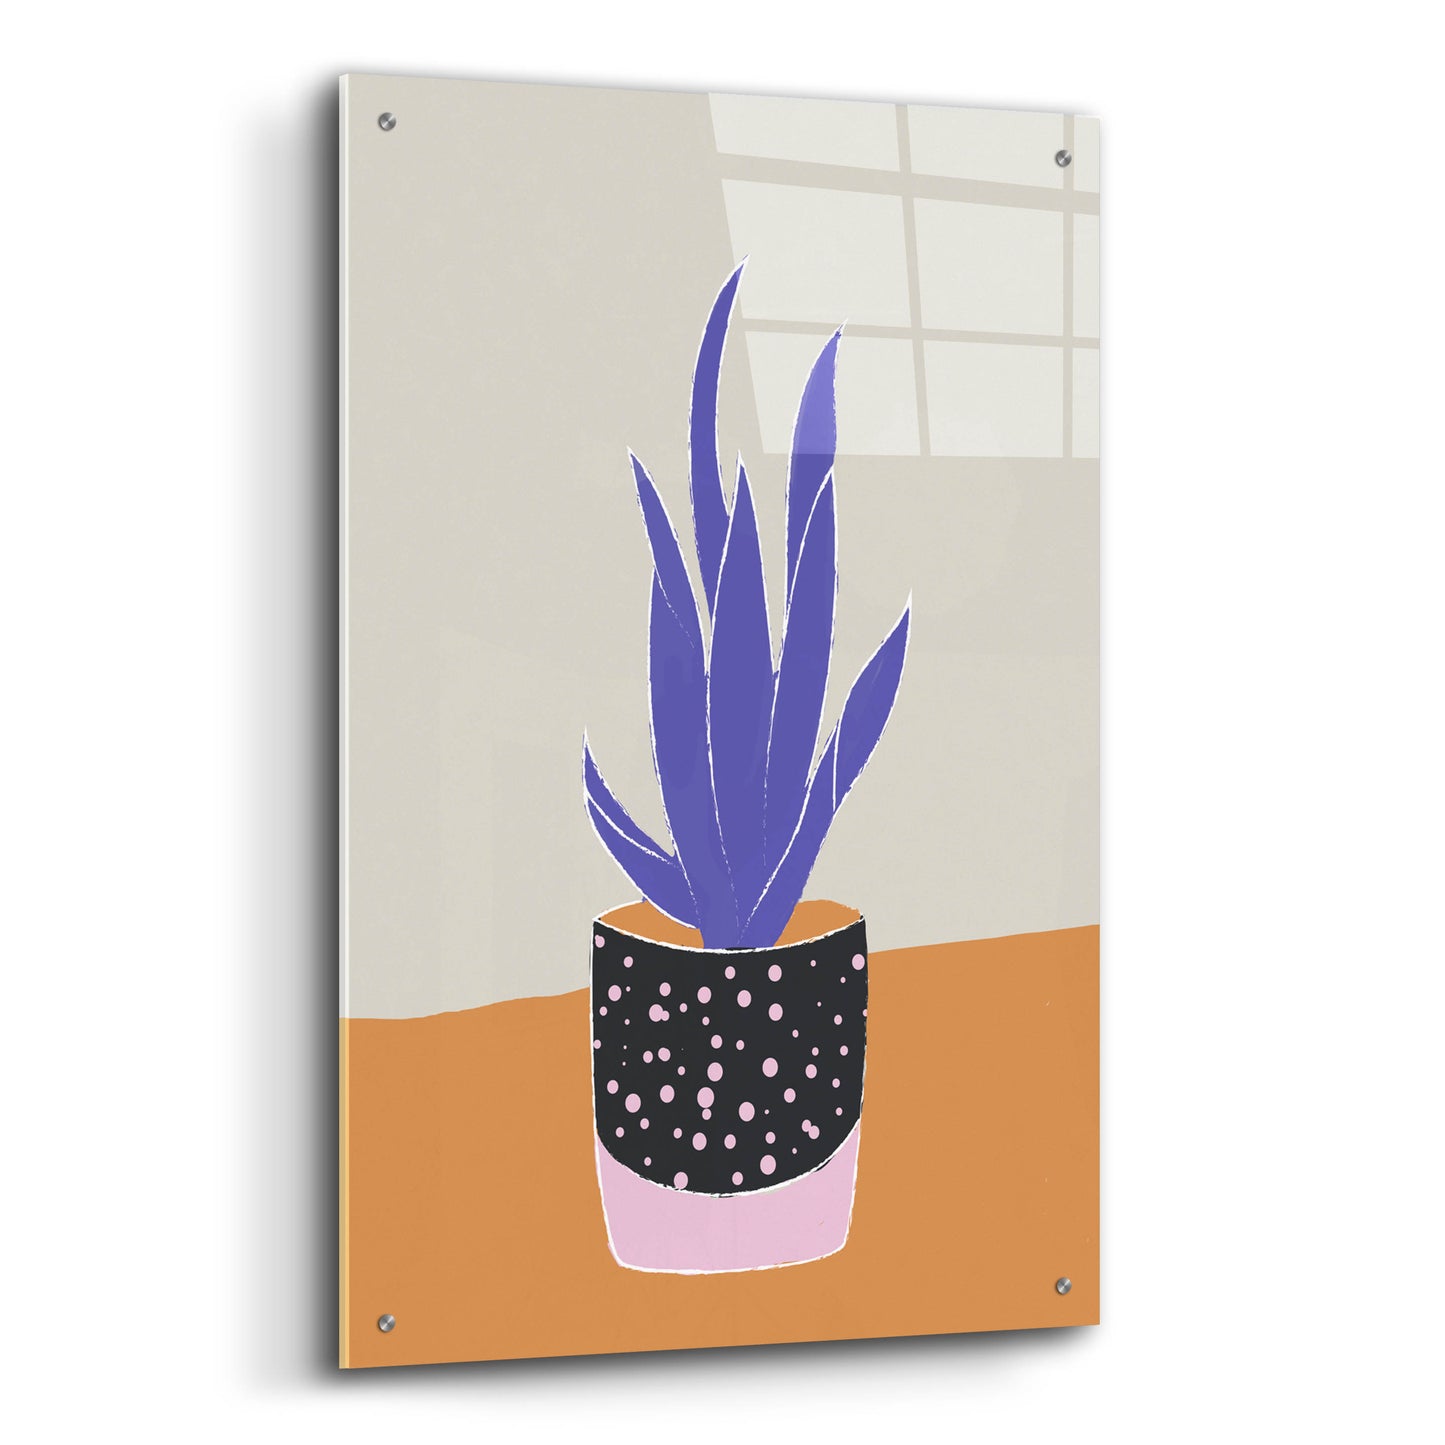 Epic Art 'Tropical Plant On A Pot Hot And Cold Trend' by Sabrina Balbuena, Acrylic Glass Wall Art,24x36